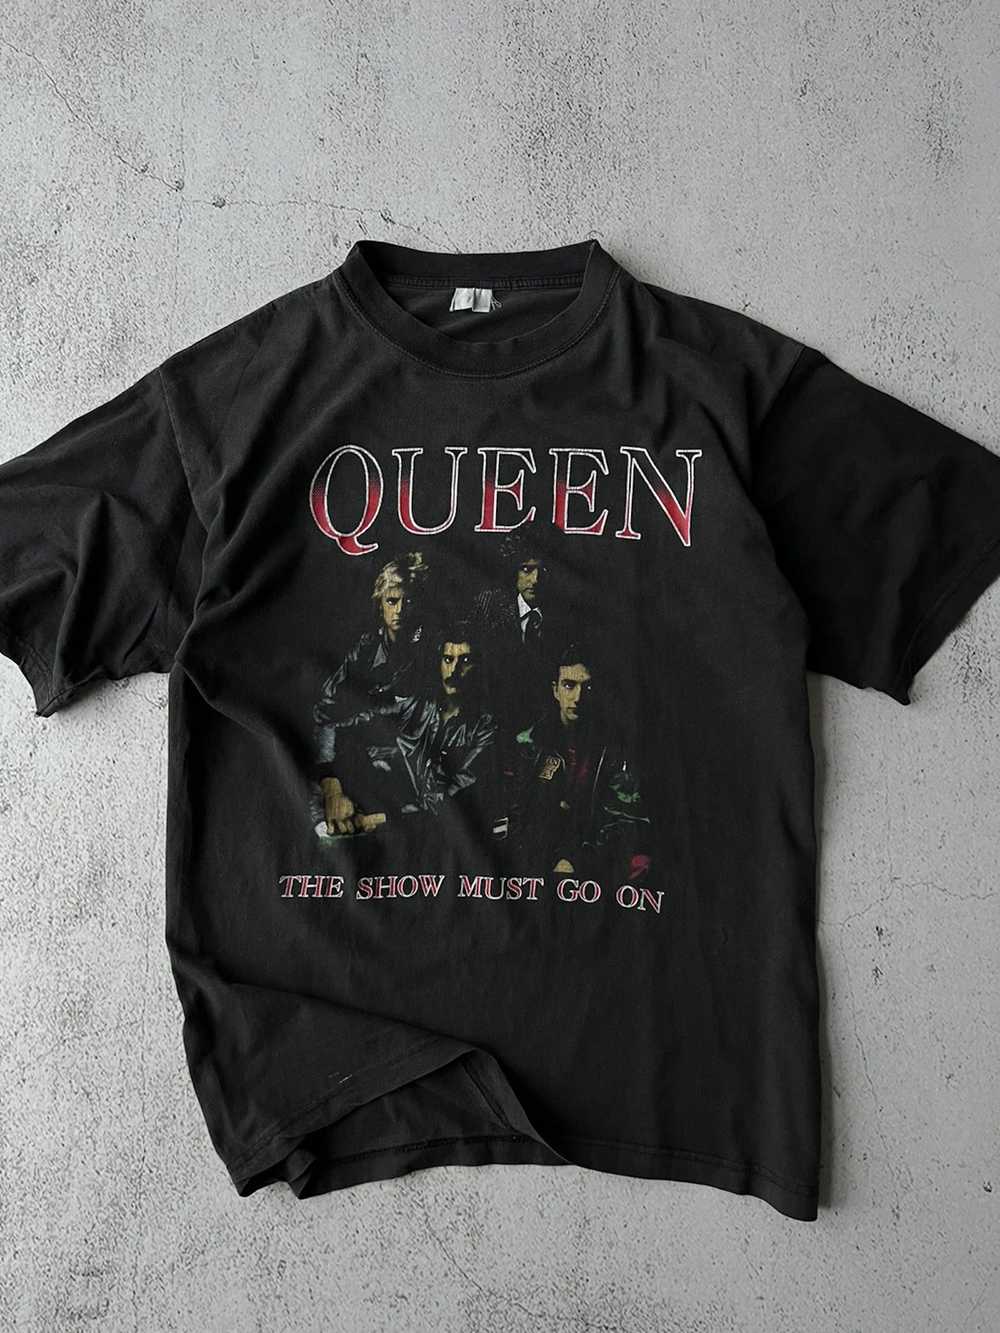 Band Tees × Queen Tour Tee × Rock Band Queen The … - image 2